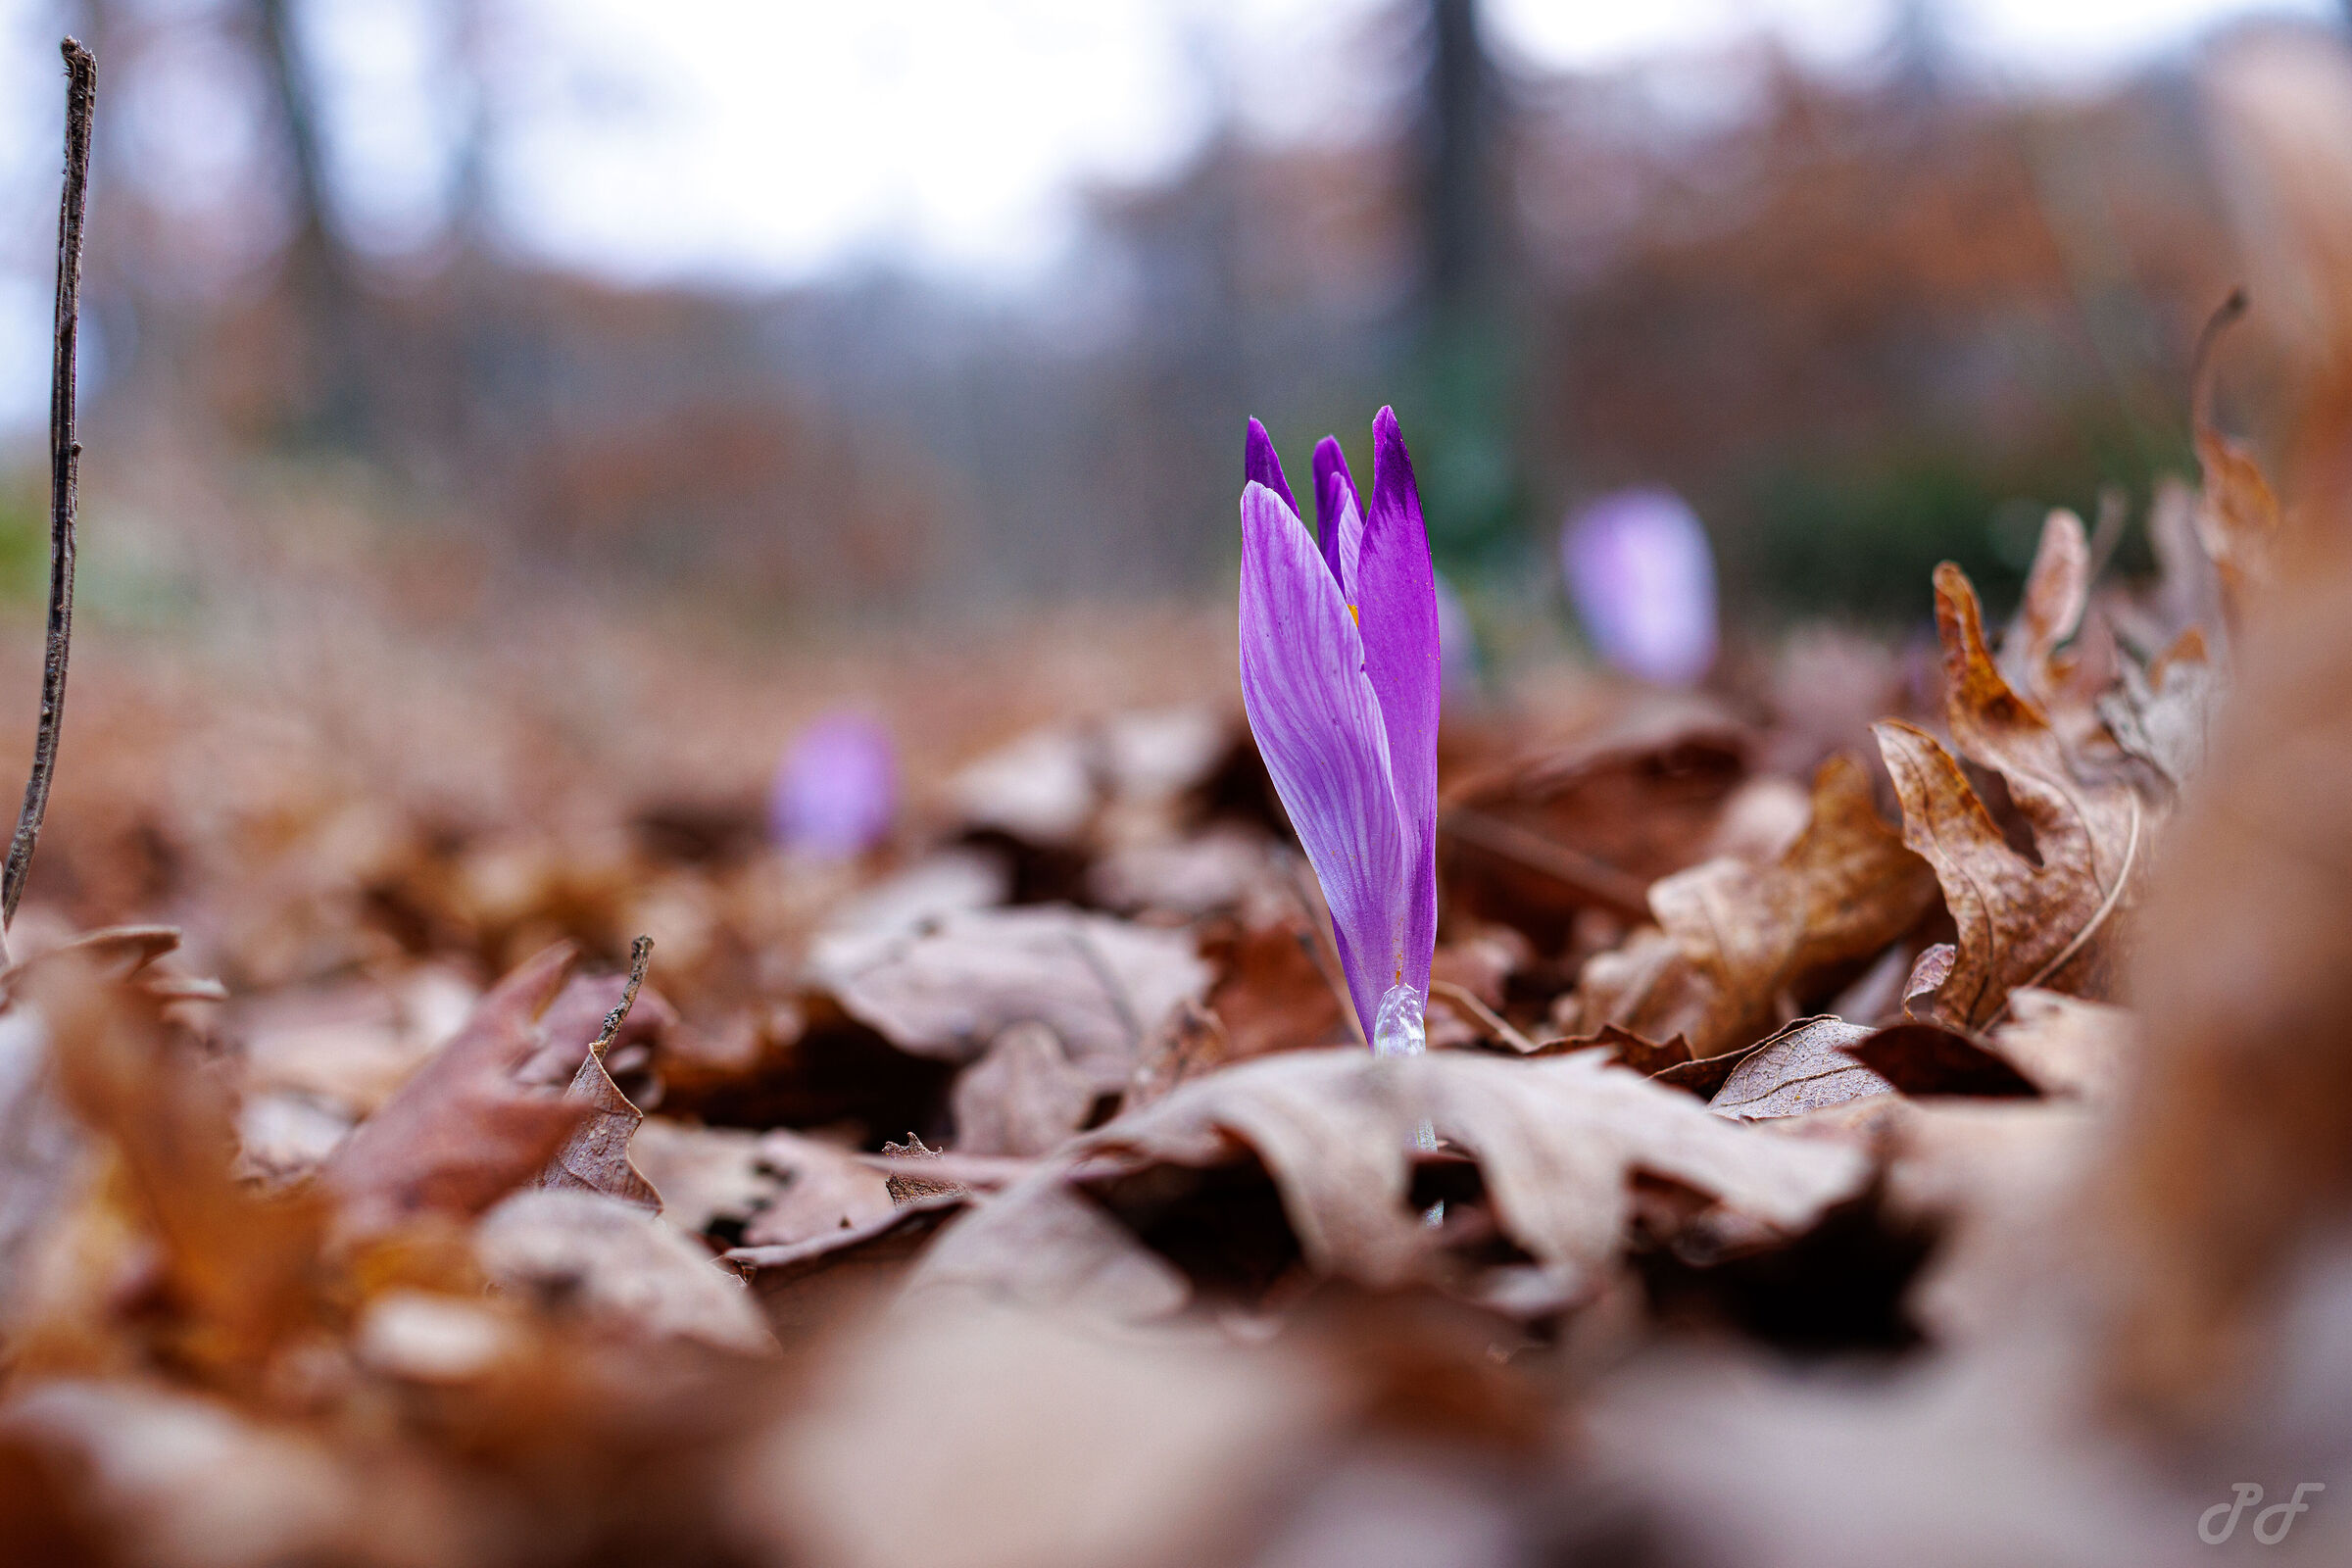 Mid-February, the first flowers sprout in the undergrowth...